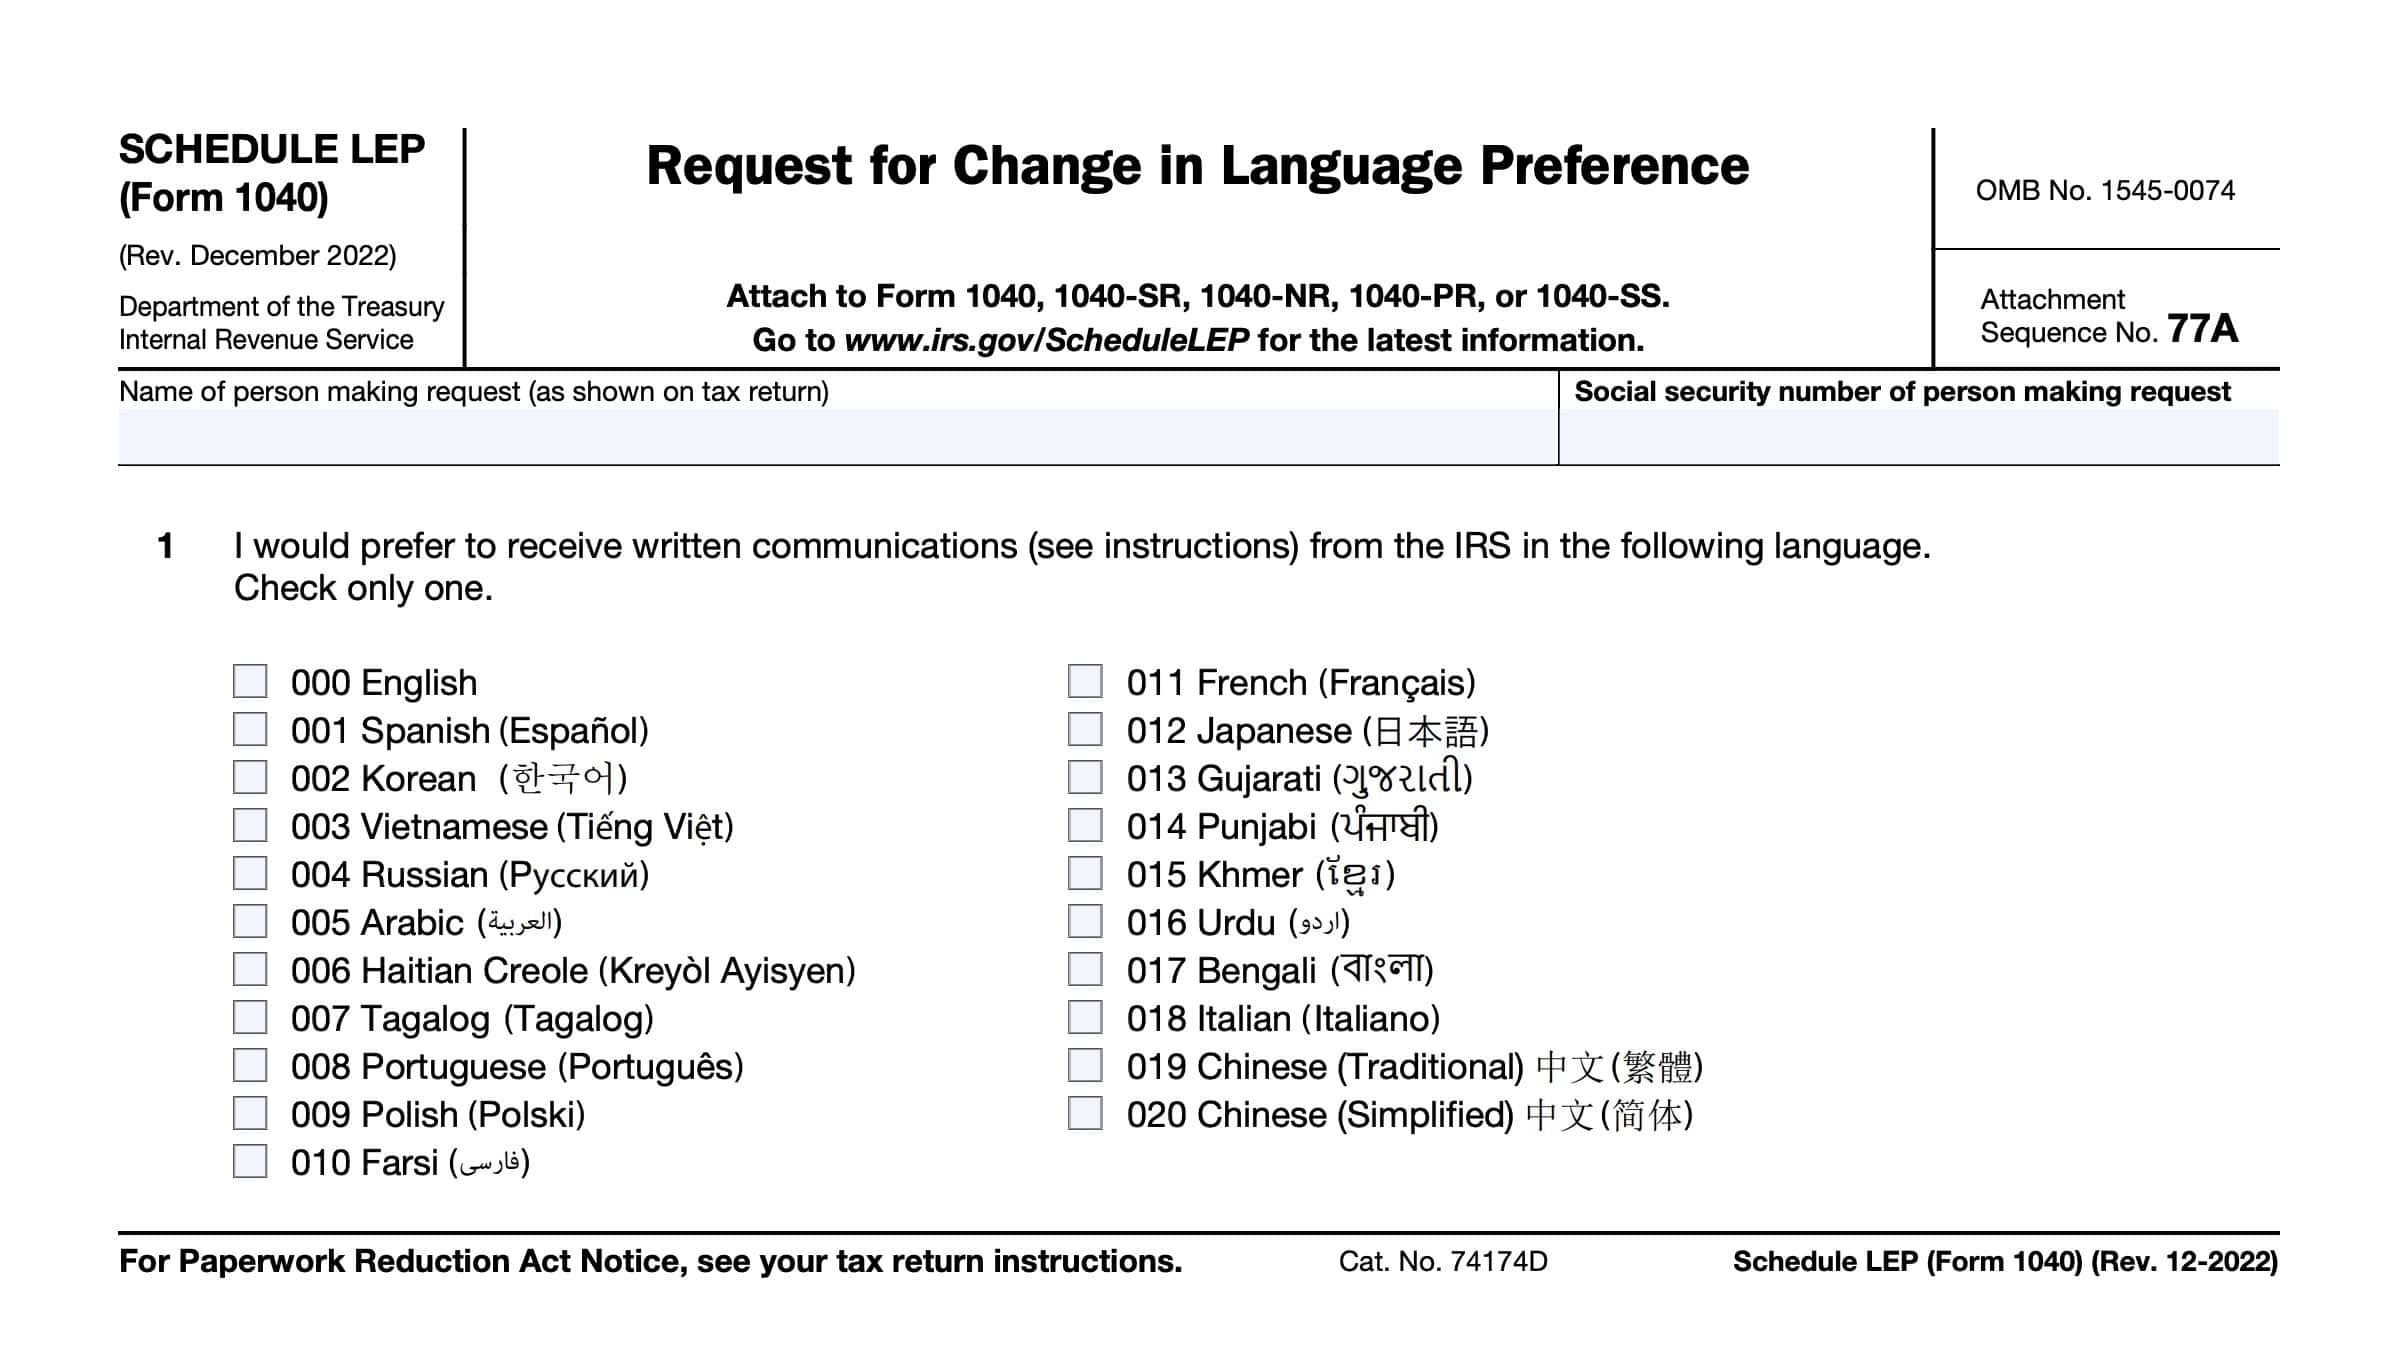 irs schedule lep, request for change in lanugage preference